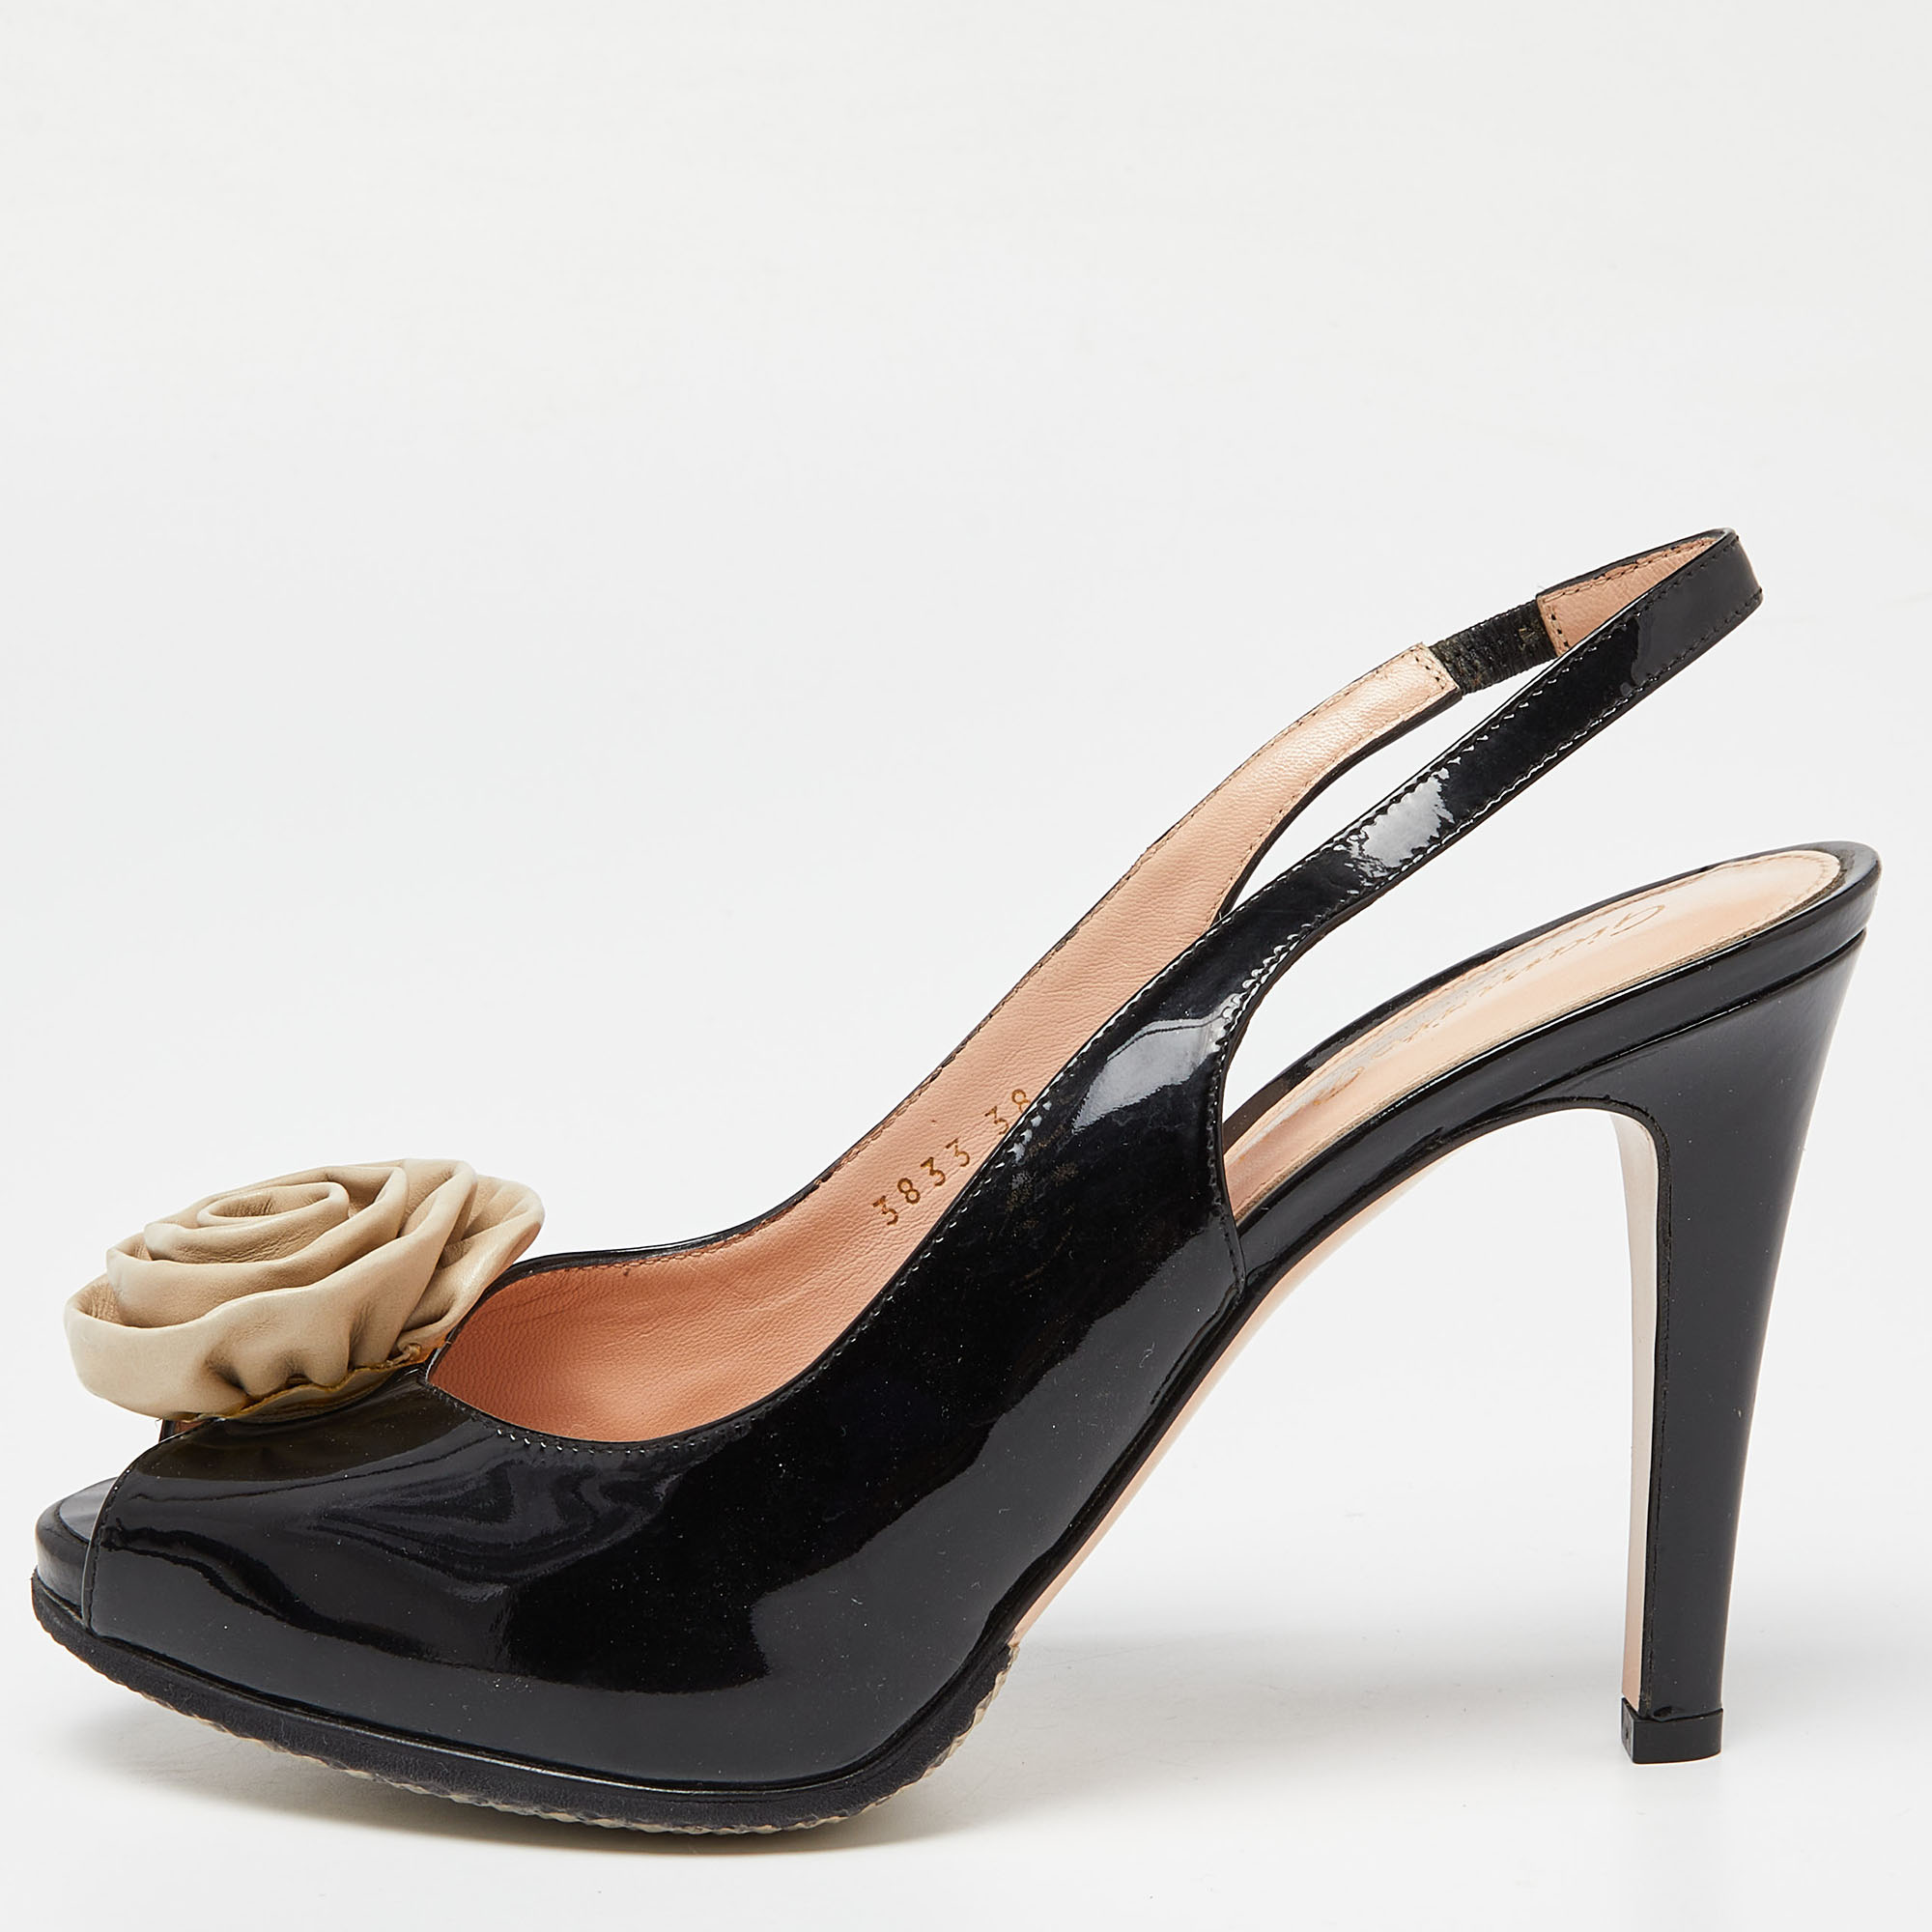 Pre-owned Gianvito Rossi Black Patent Leather Flower Applique Peep Toe Slingback Pumps Size 38